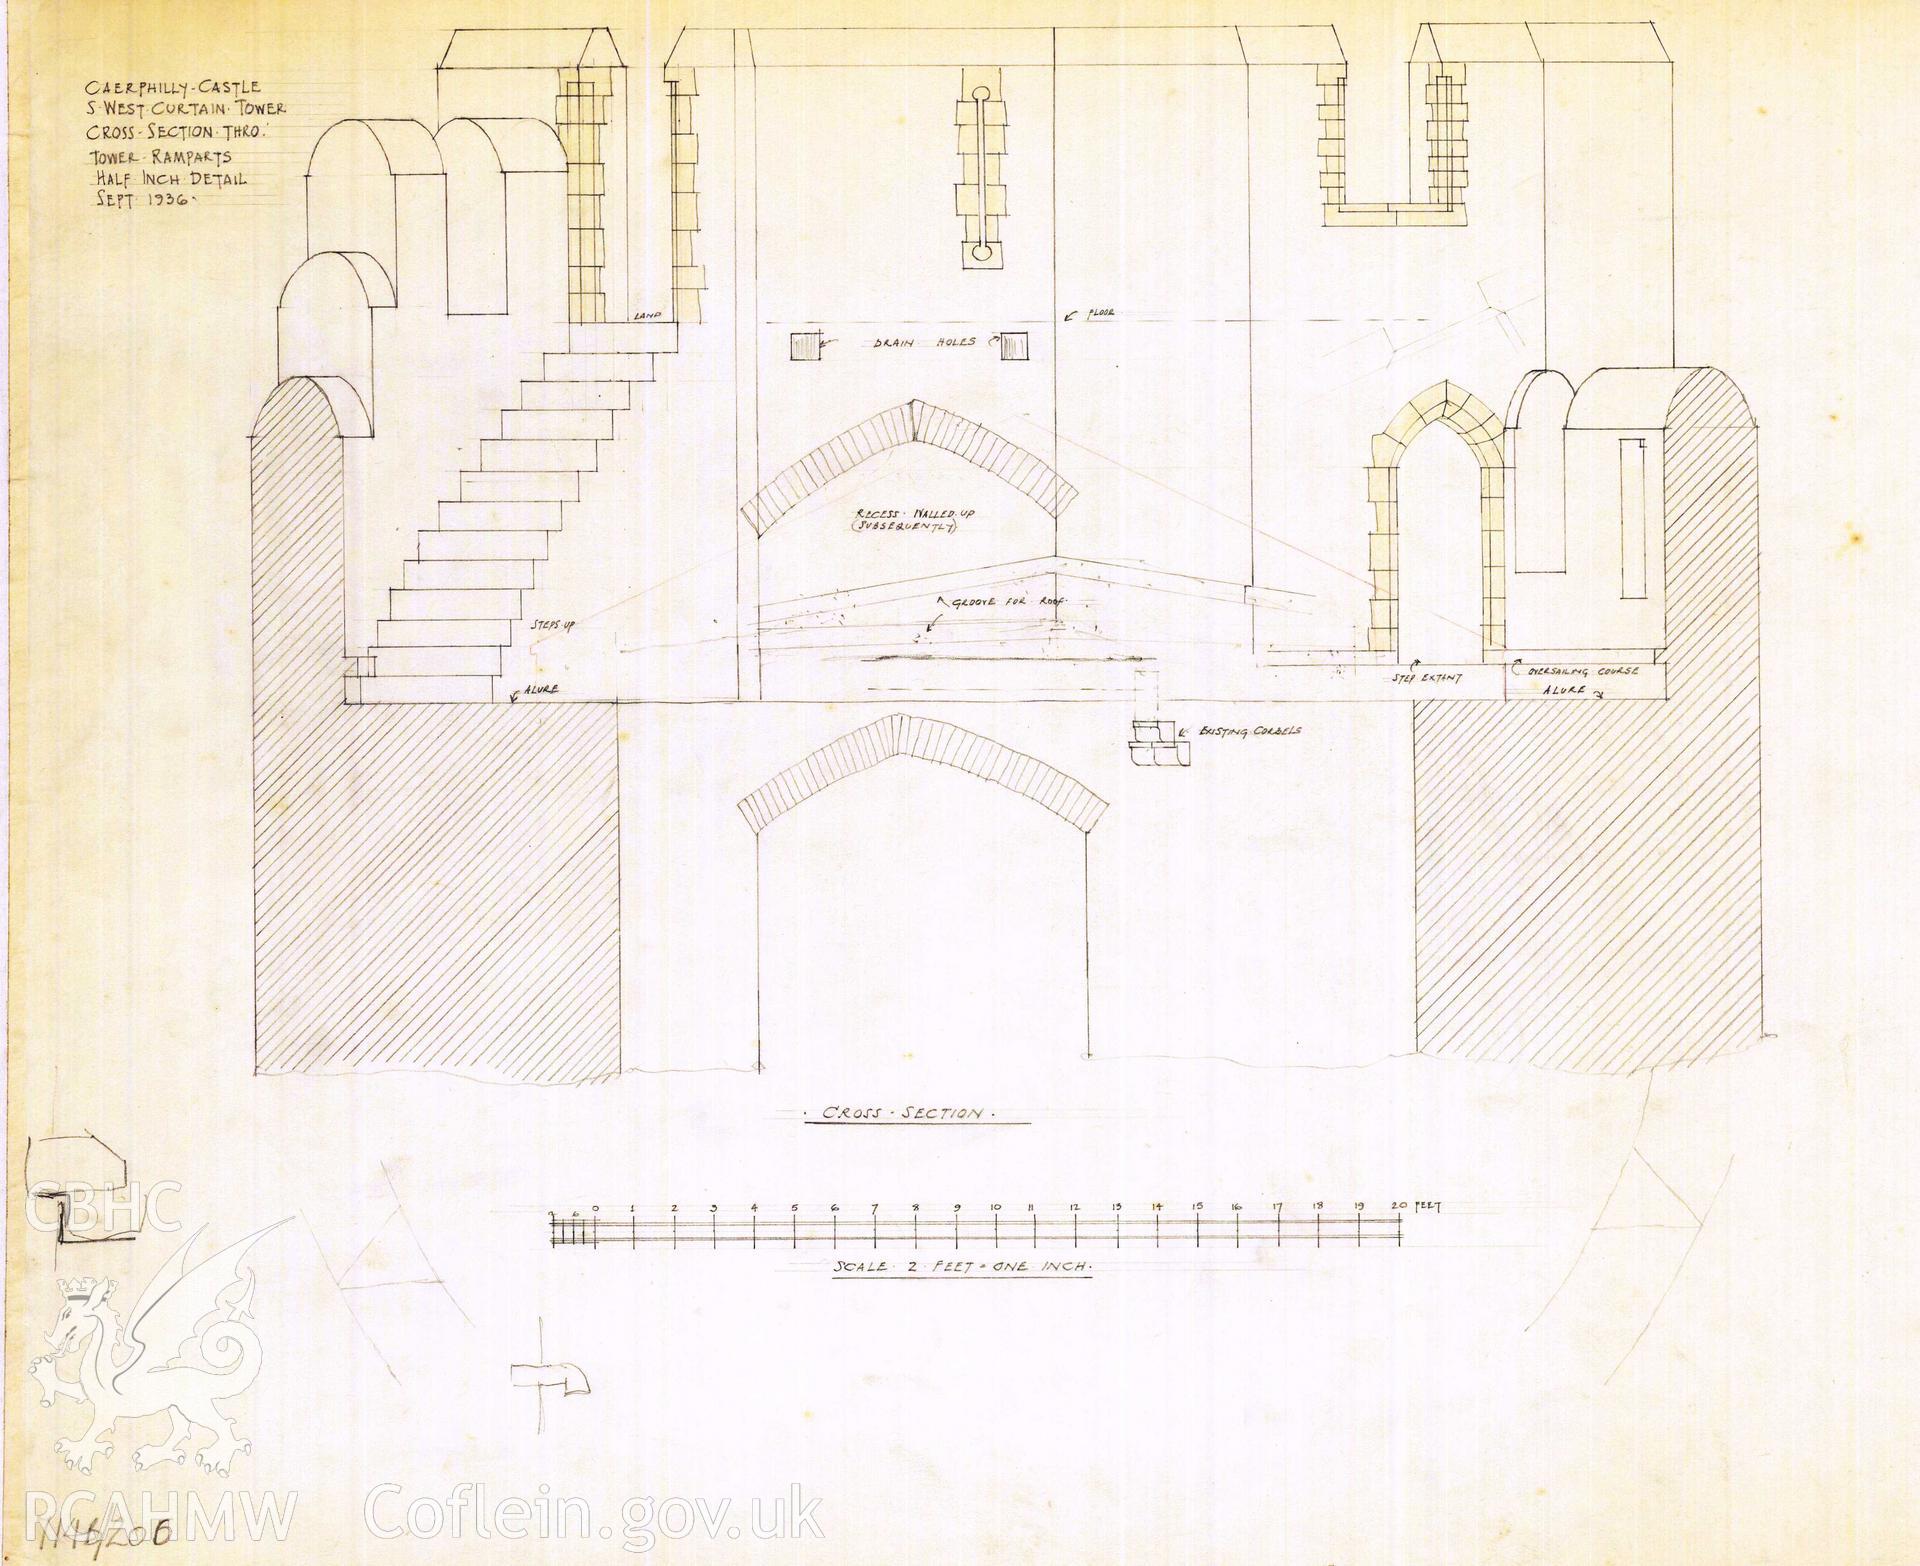 Cadw guardianship monument drawing of Caerphilly Castle. SW tower, parapet section. Cadw Ref. No:714B/206. Scale 1:24.